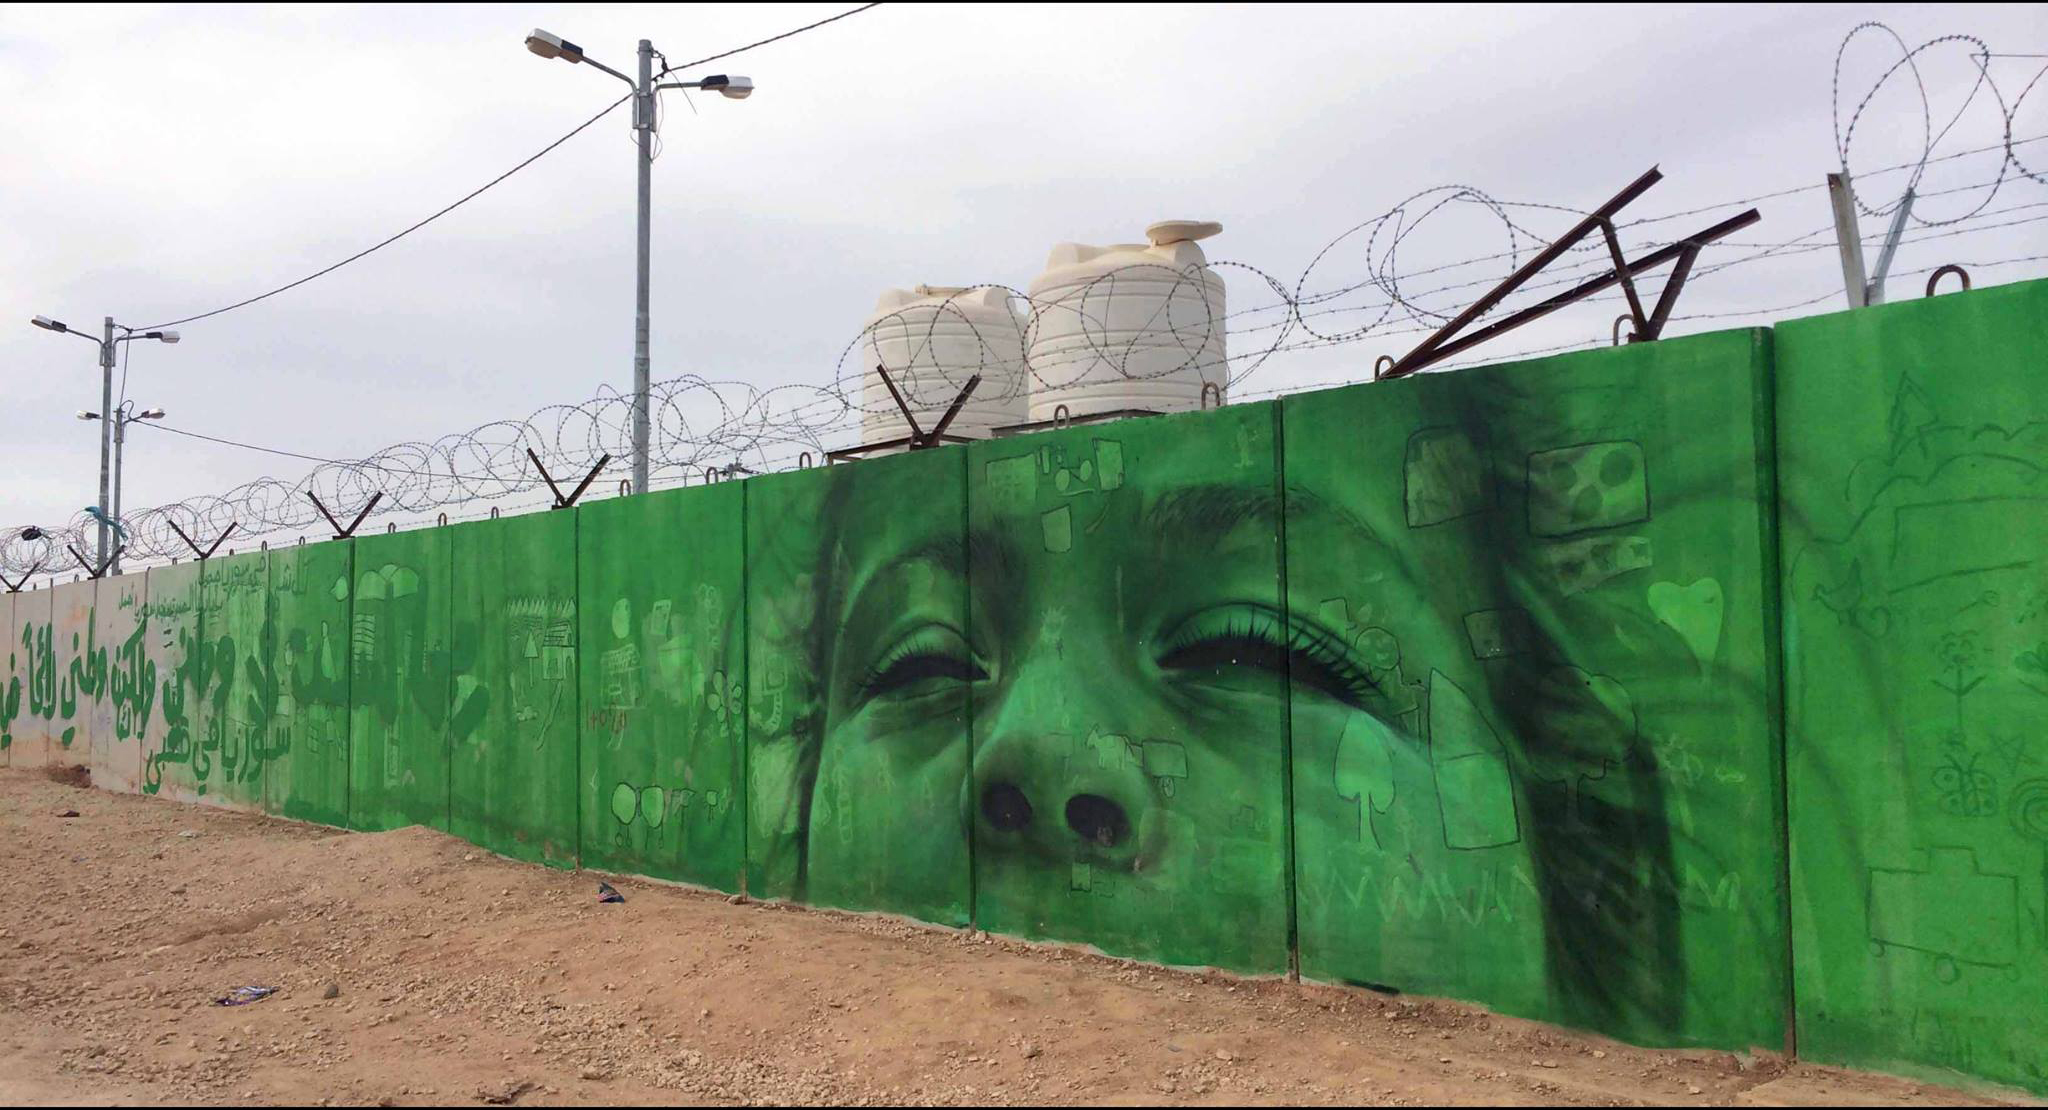 "I may not be in Syria, but Syrian is inside me. When I close my eyes I still see Syria." Mural completed in Zaatari Camp, Jordan, lead artist Jonathan Darby, photo credit Samantha Robison